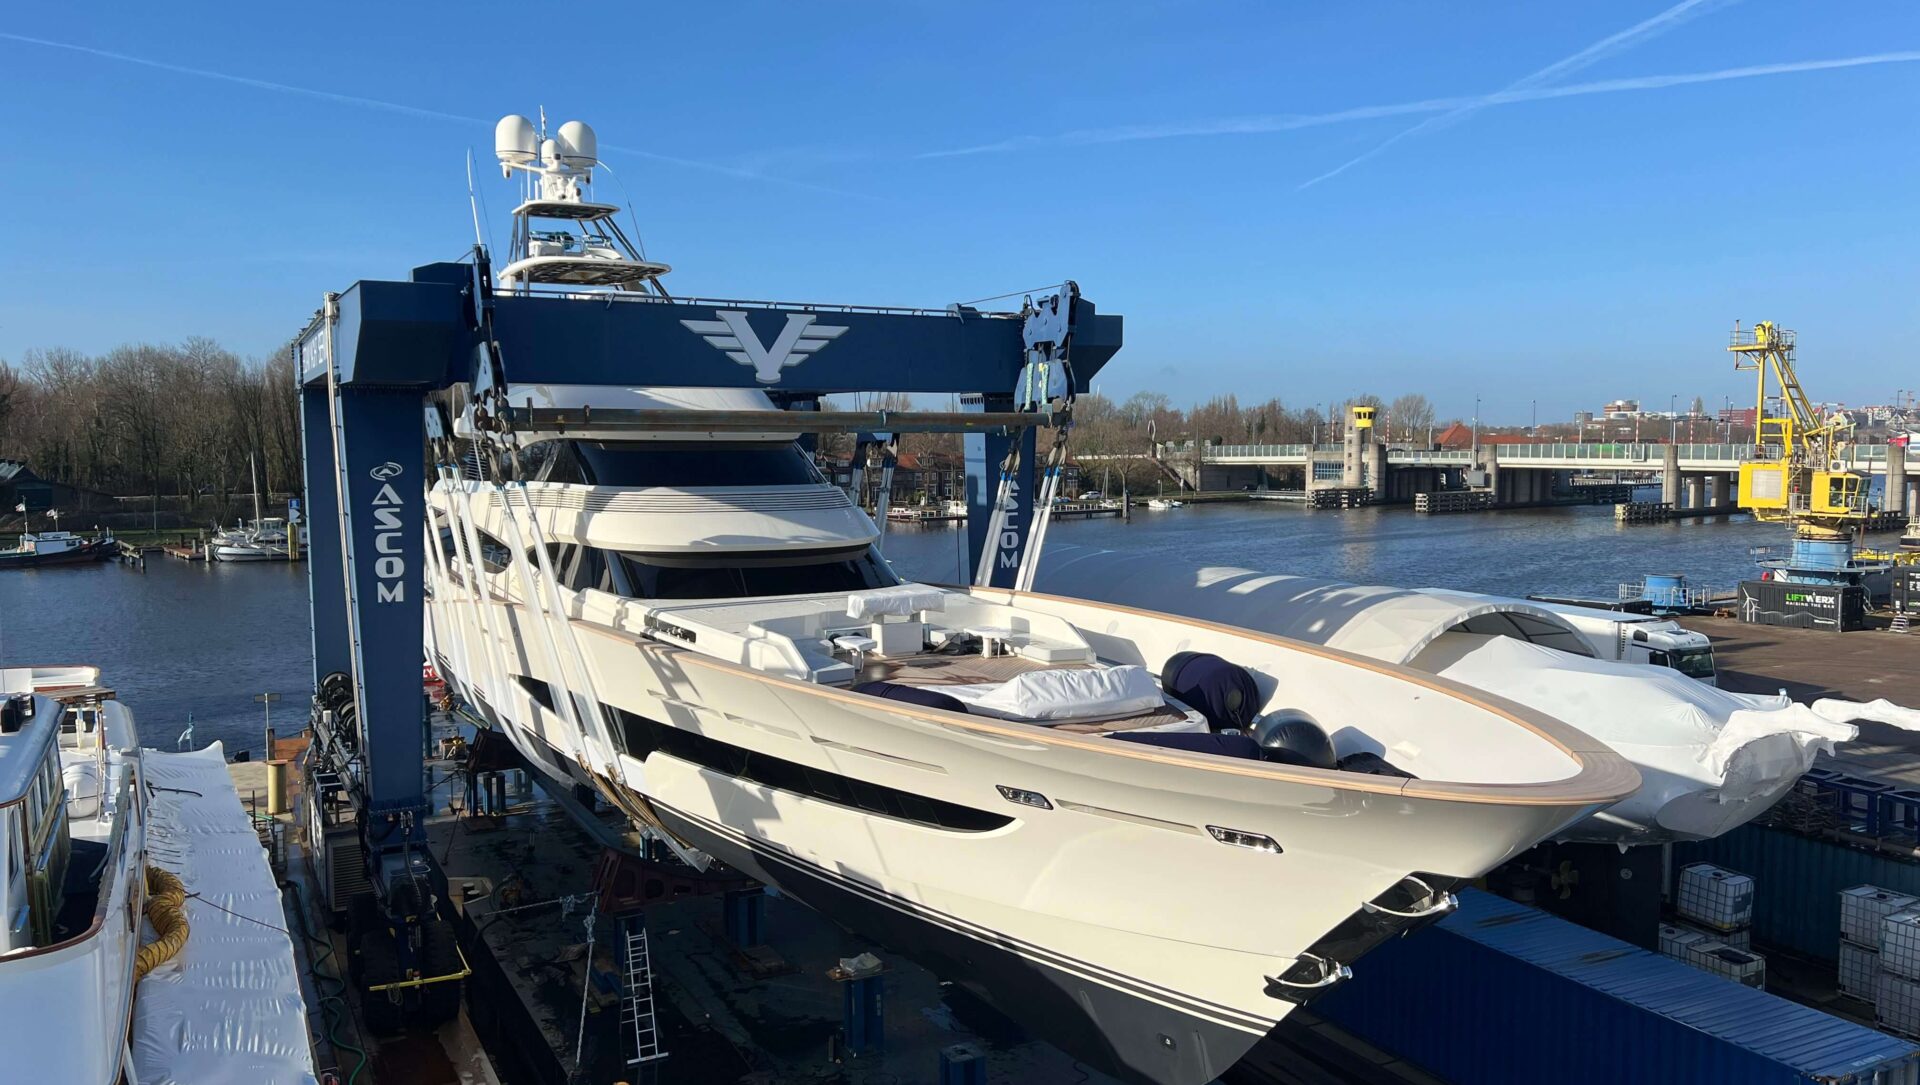 54m Huisman sportfish yacht 406 set to be launched at Amsterdam Yacht Service